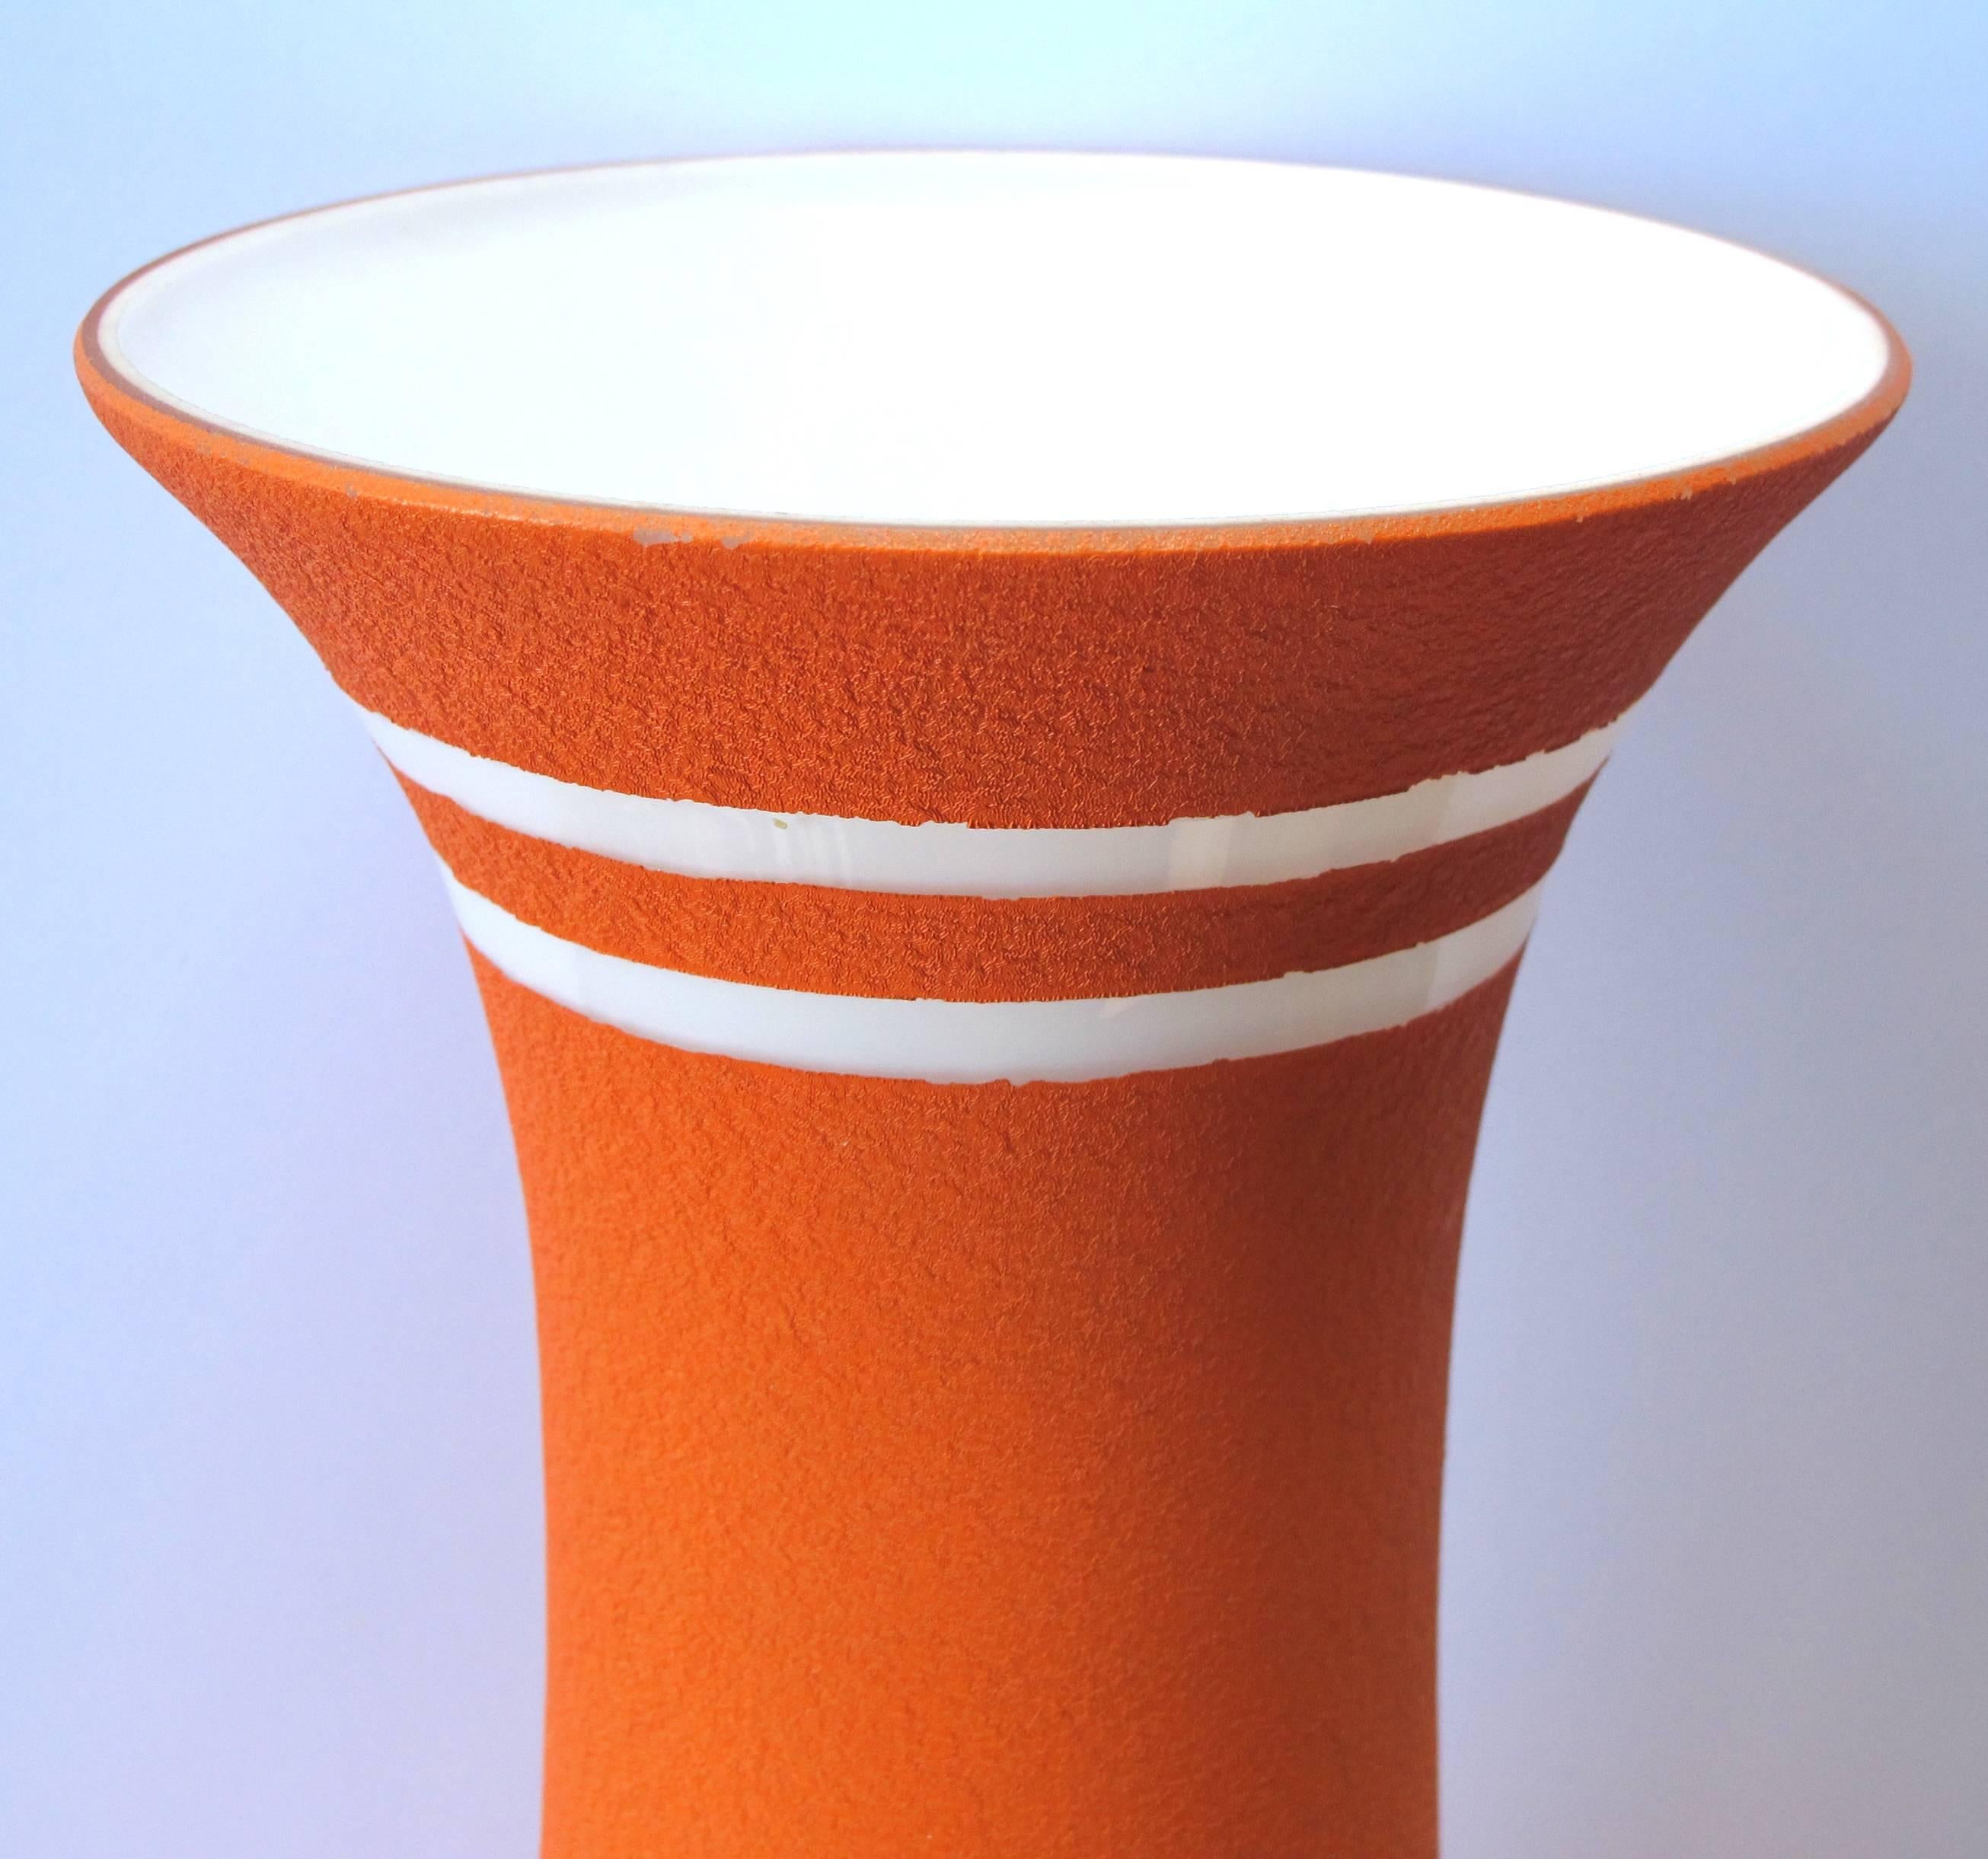 A tall and striking American 1960s orange glazed vase with white ground; the tall vase of white cased-glass covered in an orange textured glaze adorned with a continuous fret band.